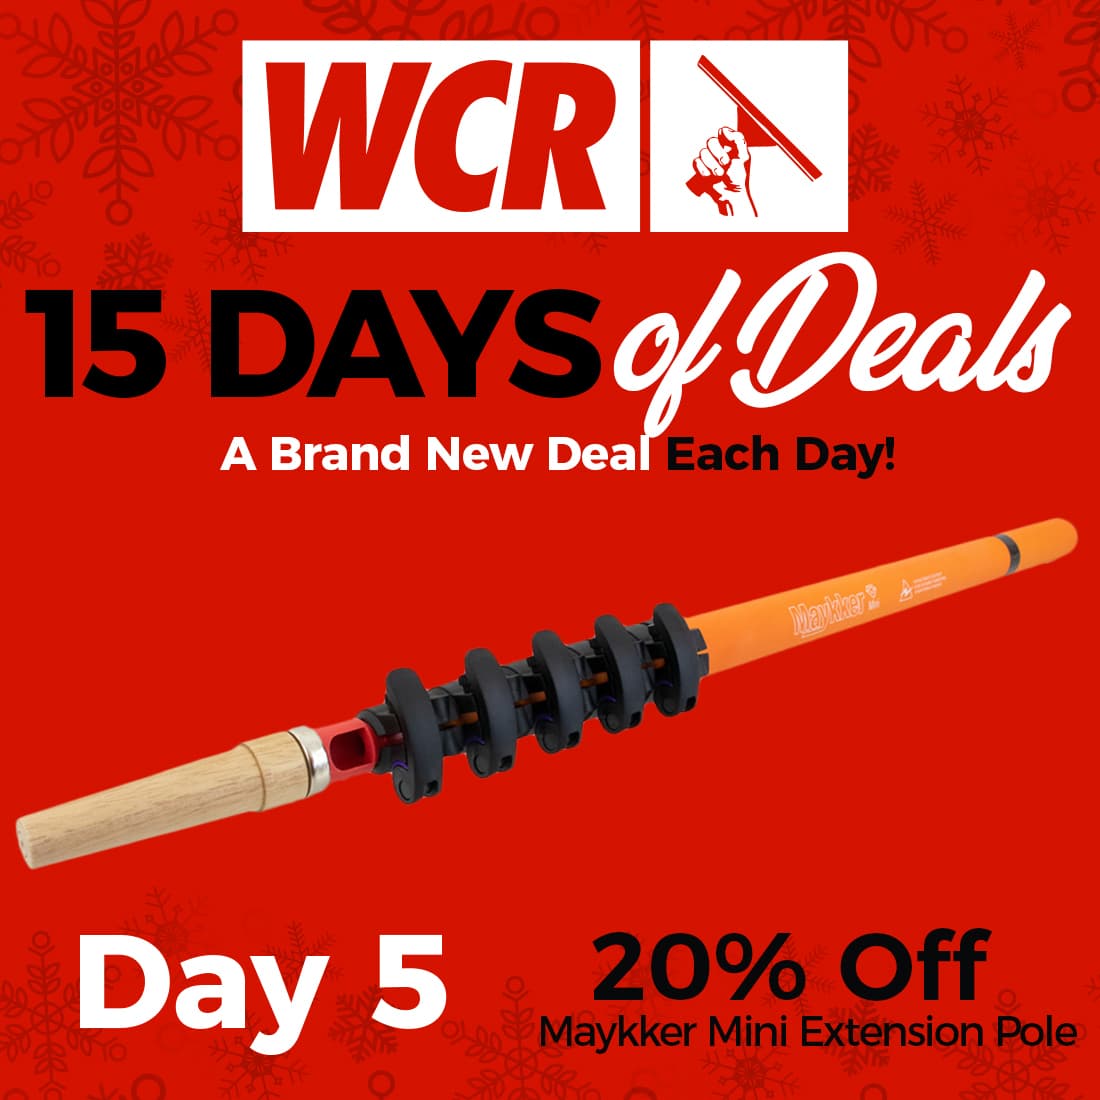 facebook-shareable-15-day-sale-day-5-Red